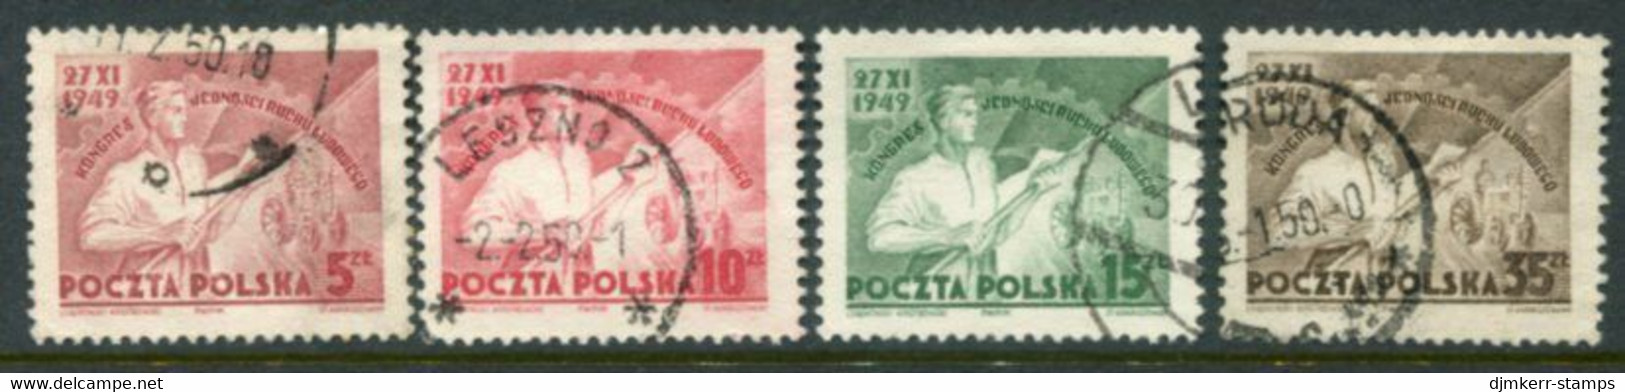 POLAND 1949  Peasant Movement Congress. Used.  Michel 539-42 - Used Stamps